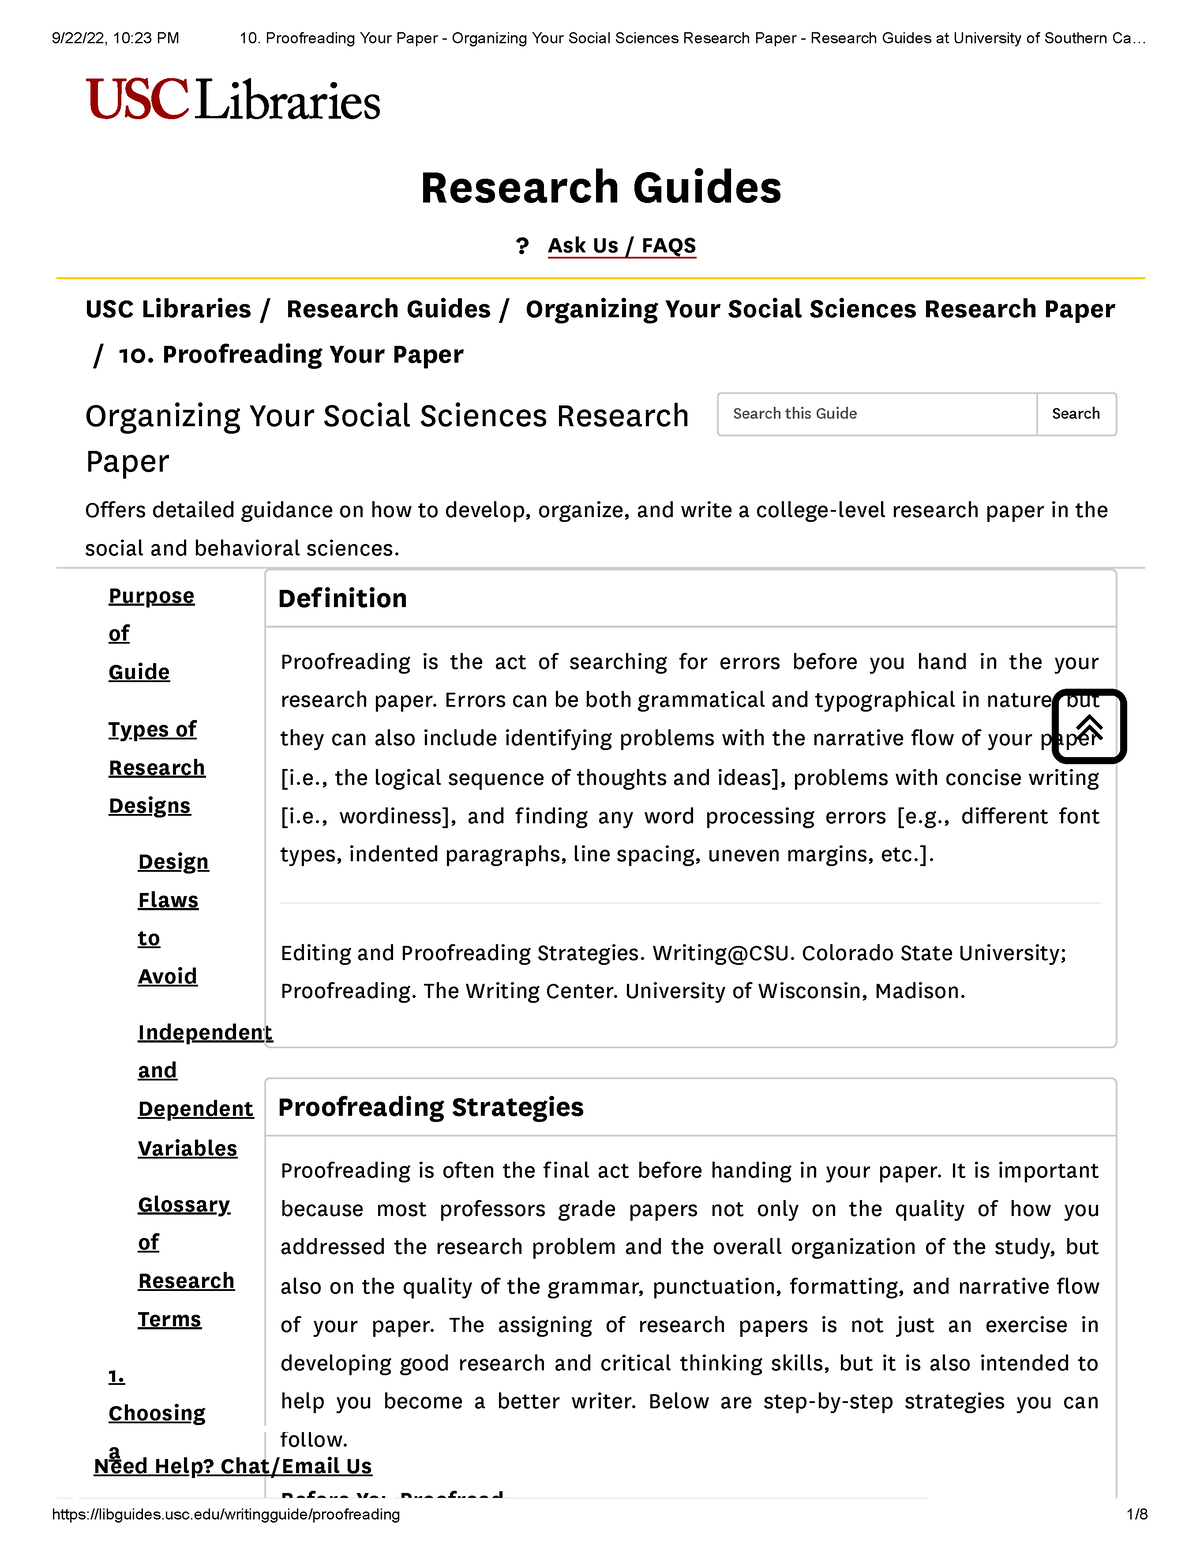 organizing your social sciences research paper using visual aids